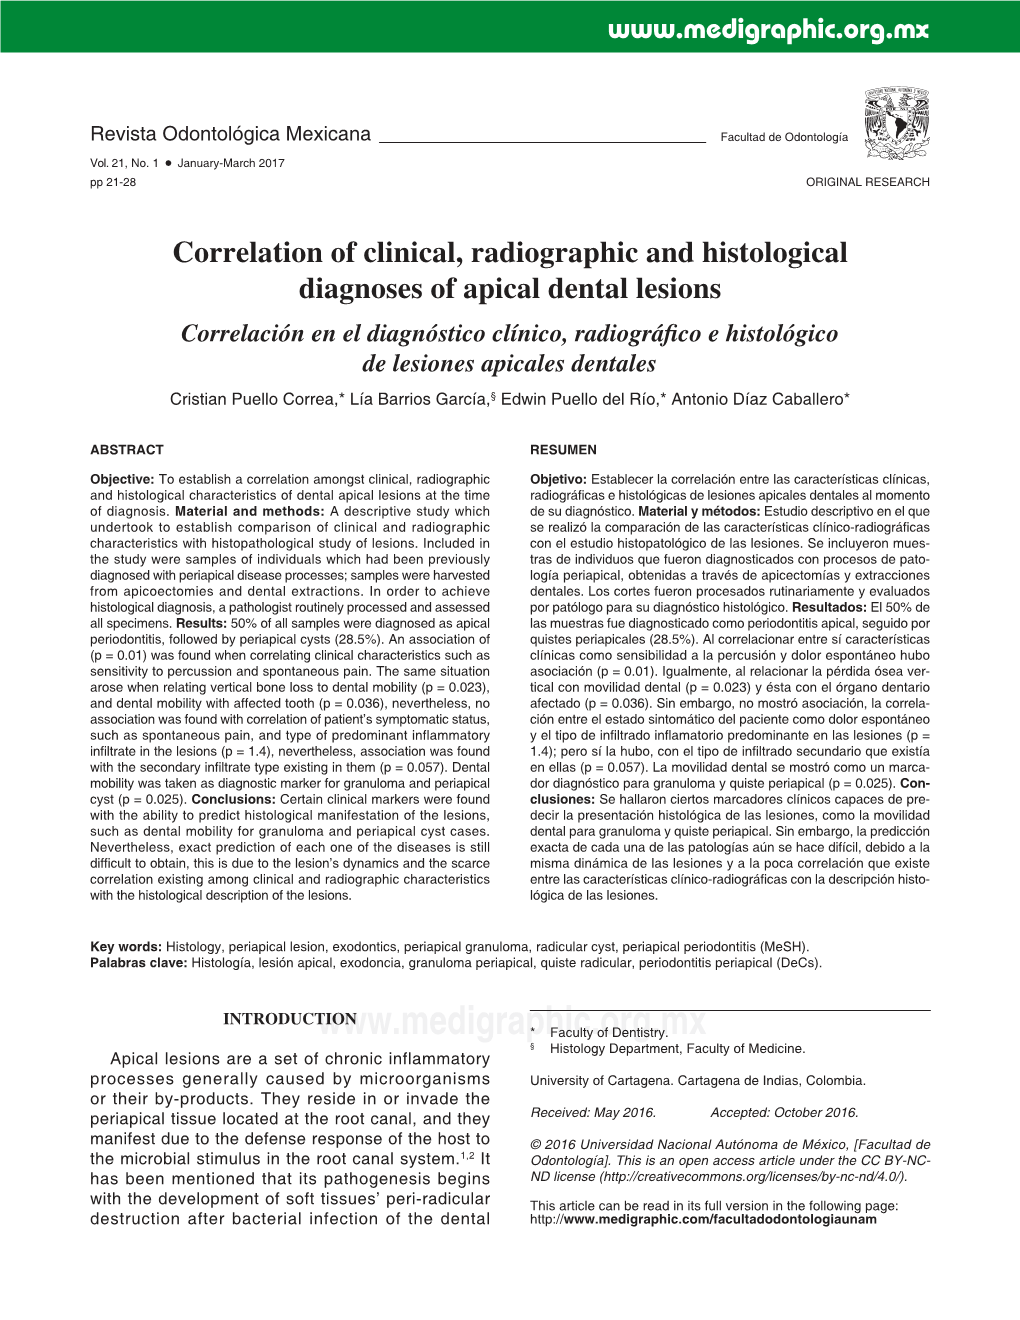 Correlation of Clinical, Radiographic and Histological Diagnoses of Apical